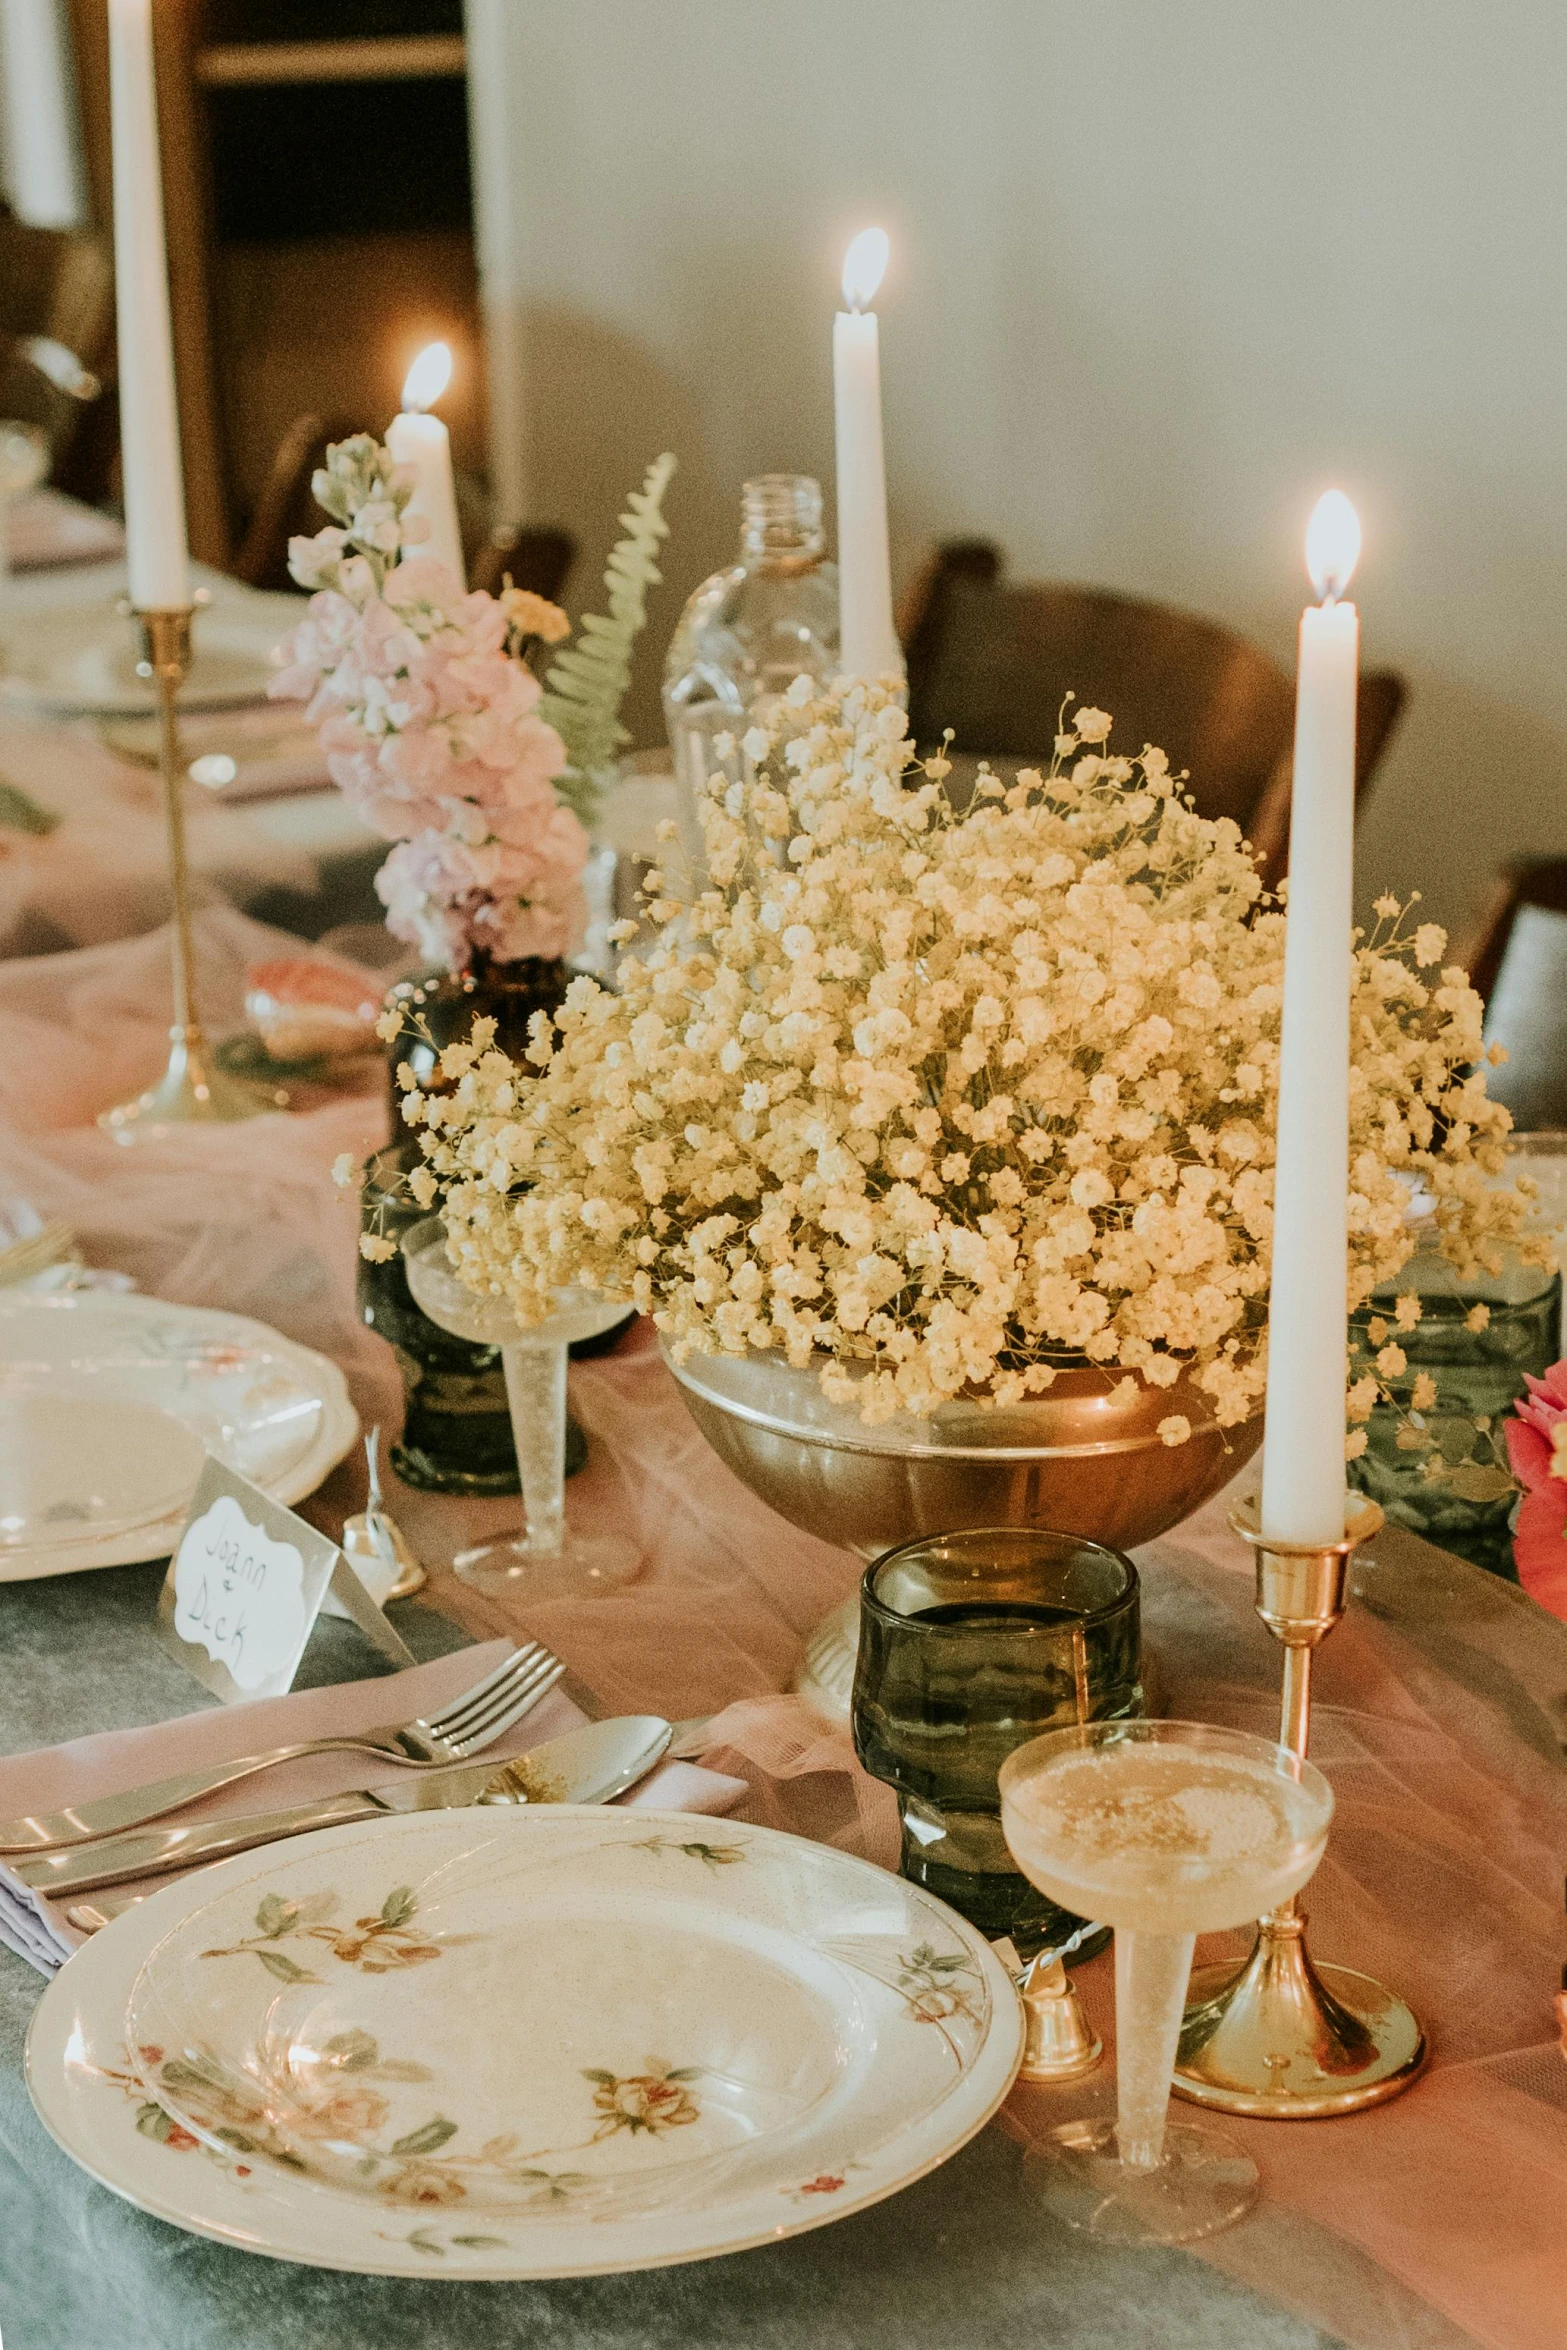 table set with flowers and candles on plates